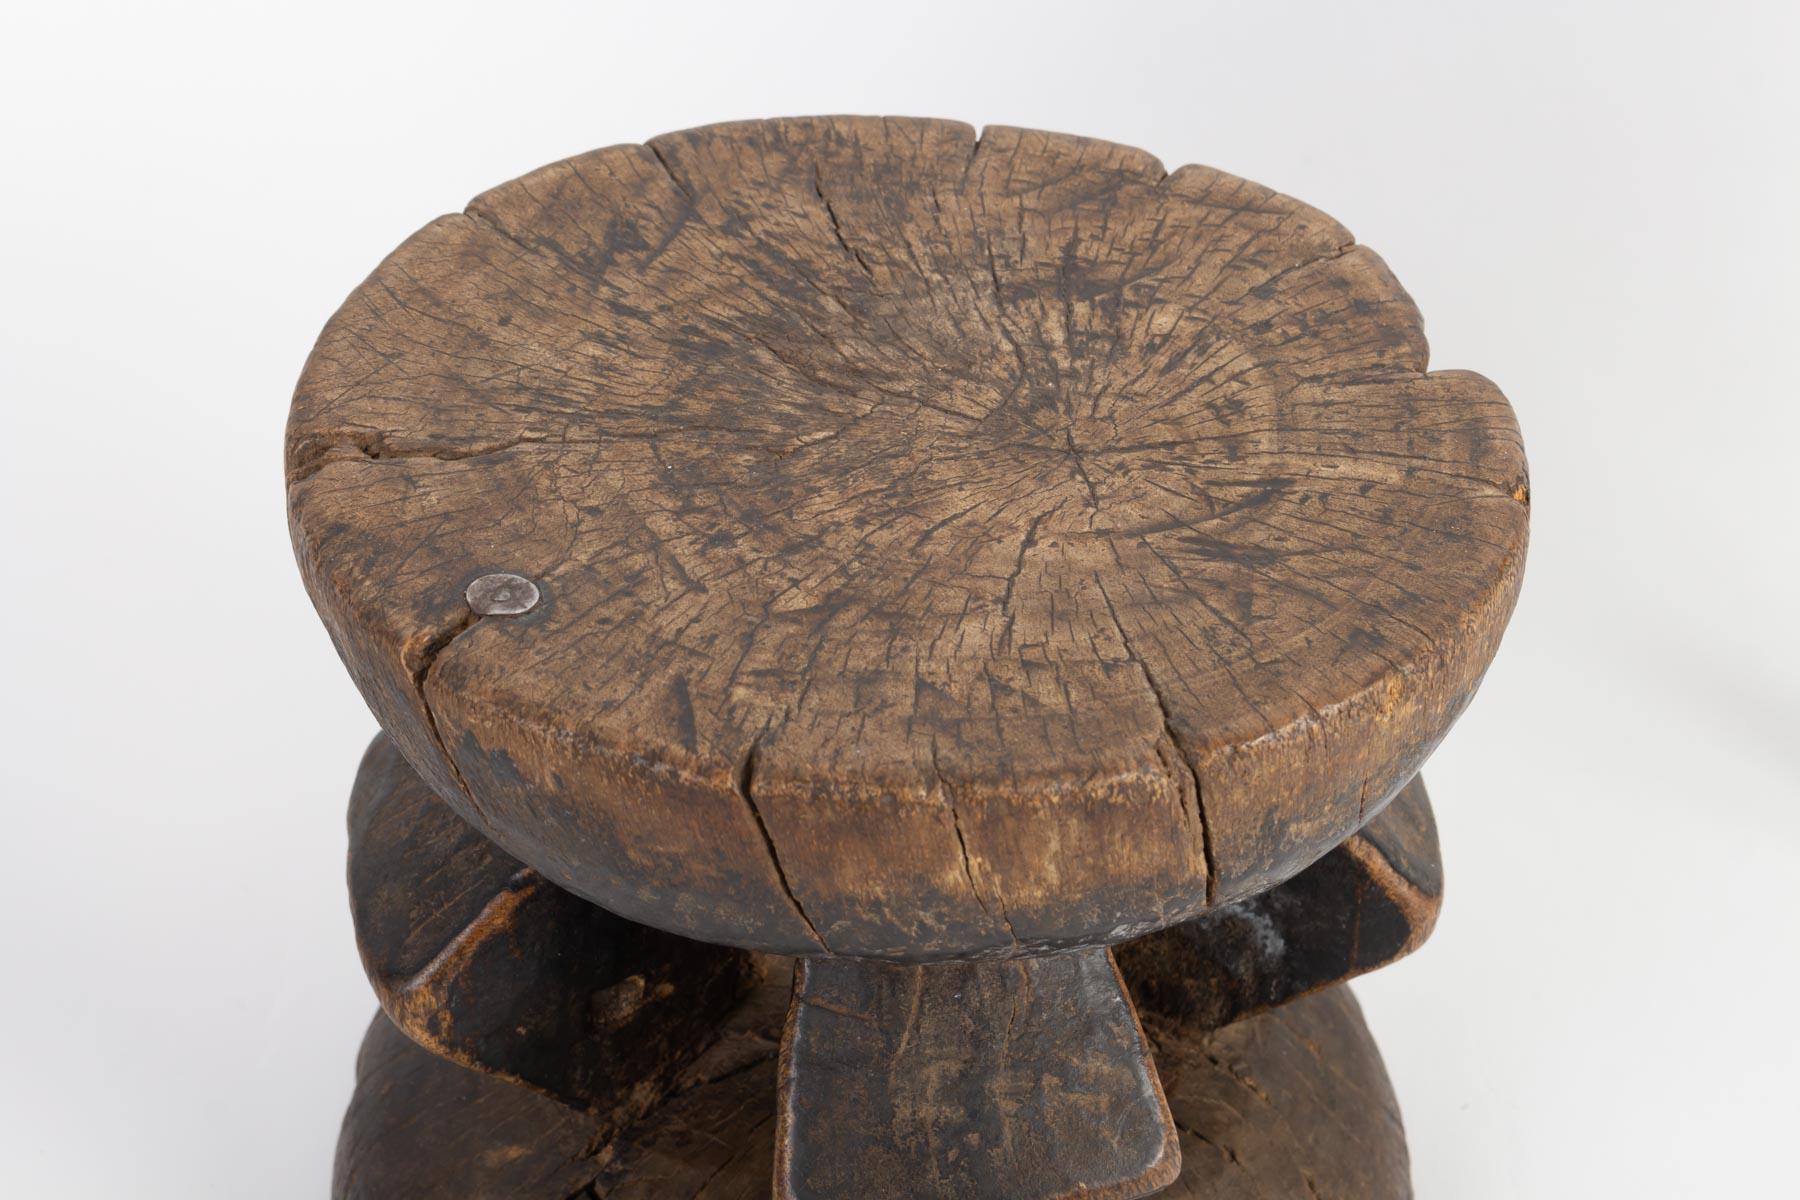 African wooden stool, 20th century.
Measures: H 18 cm, D 18 cm.